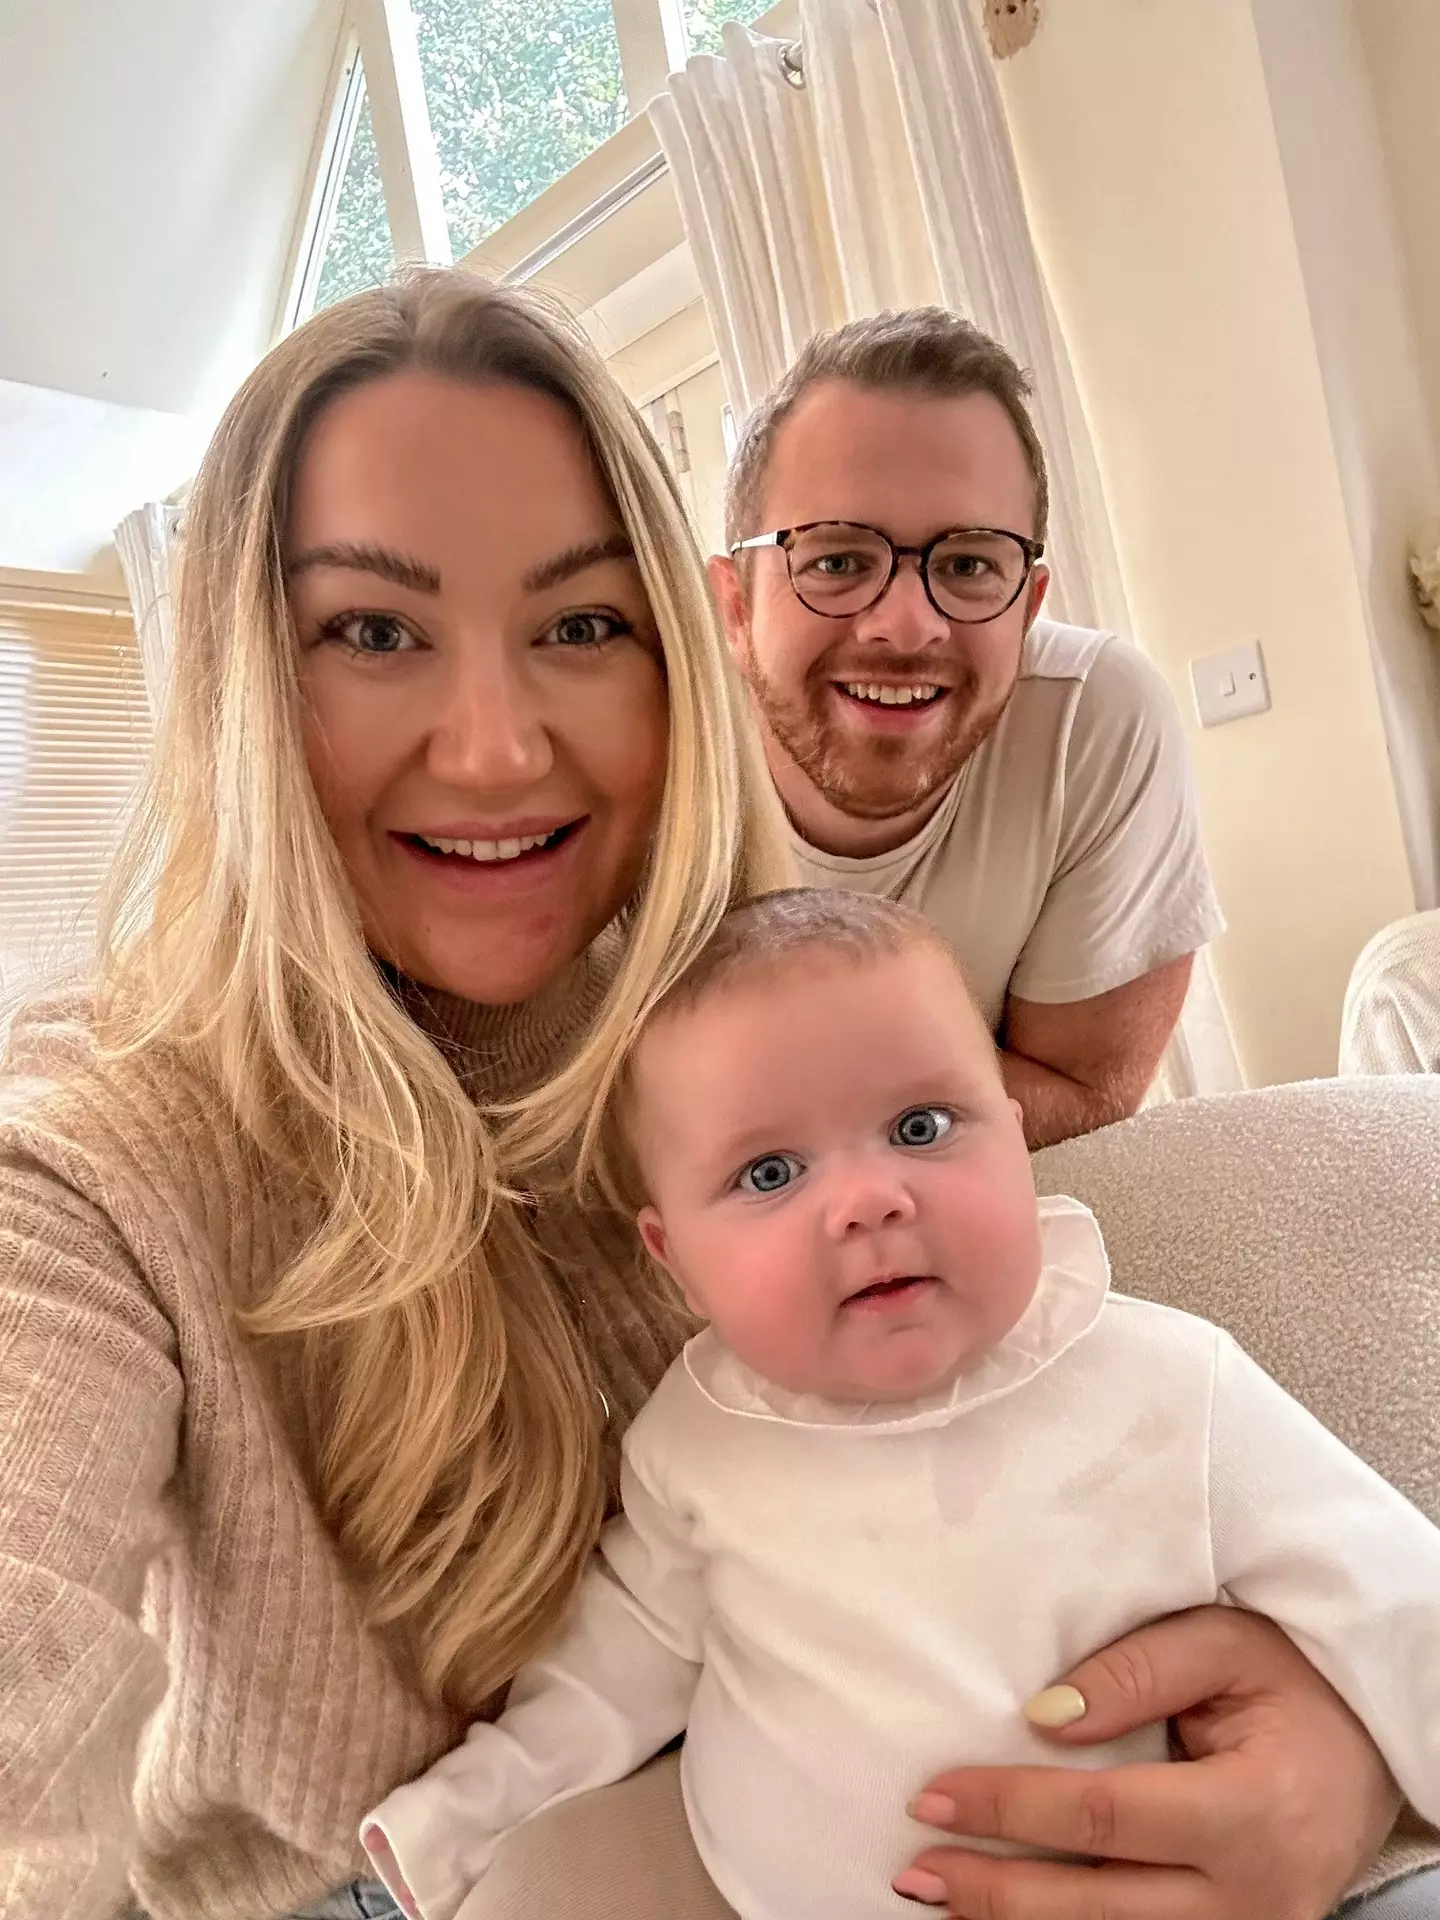 Tara Burnett has opened up about her fertility journey after conceiving her 'miracle child' following devastating miscarriages.